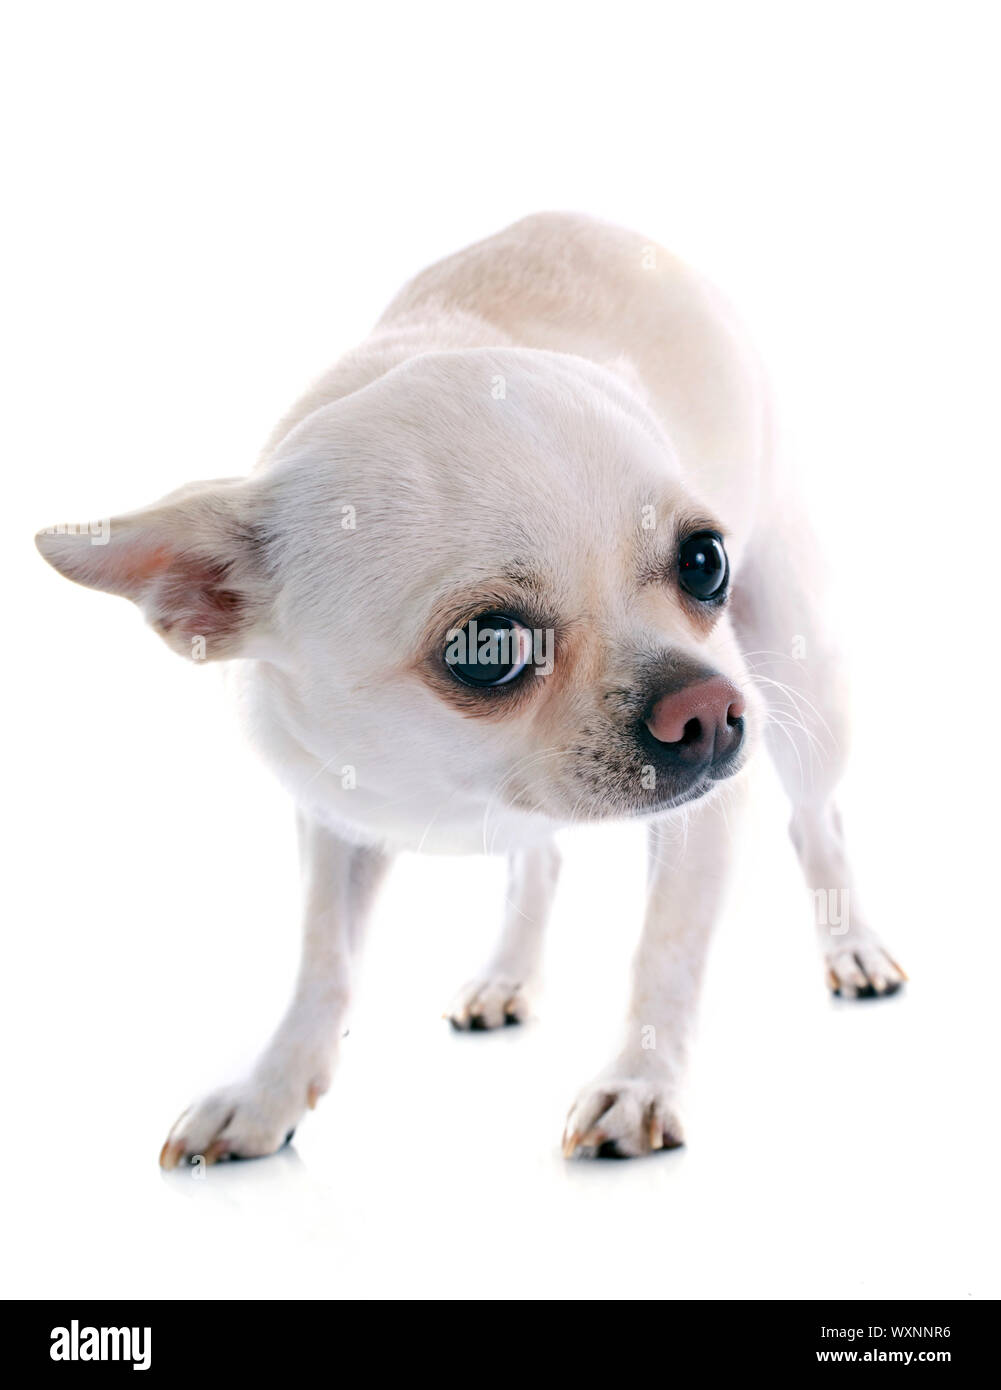 afraid chihuahua in front of white background Stock Photo